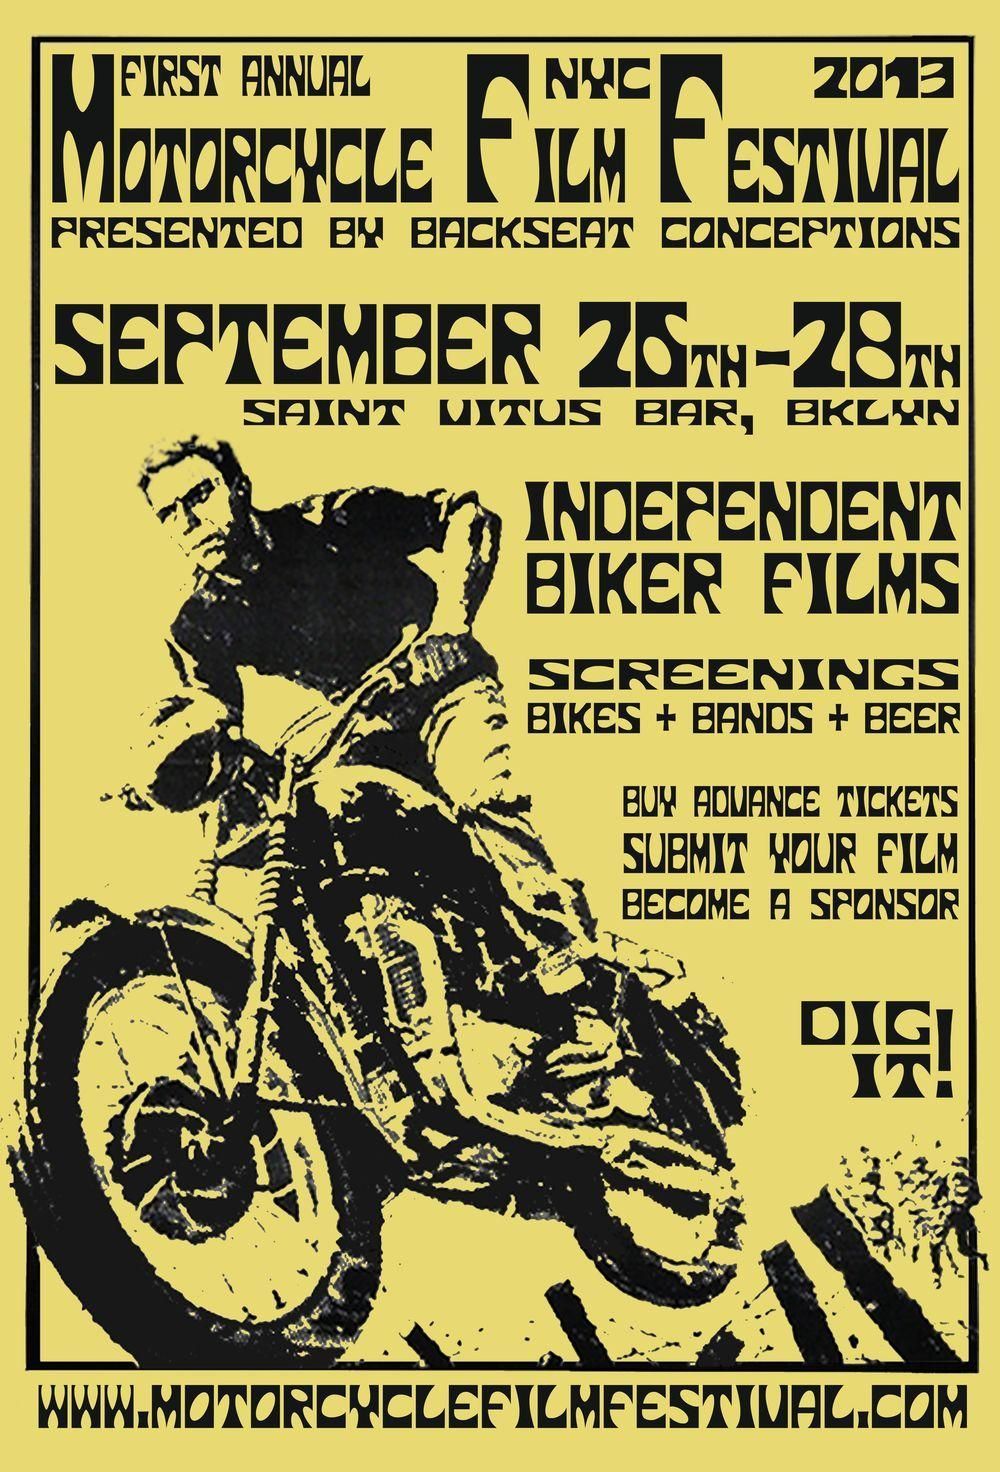 Motorcycle Film Festival Sept 25 - 28, 2013 in Brooklyn NY